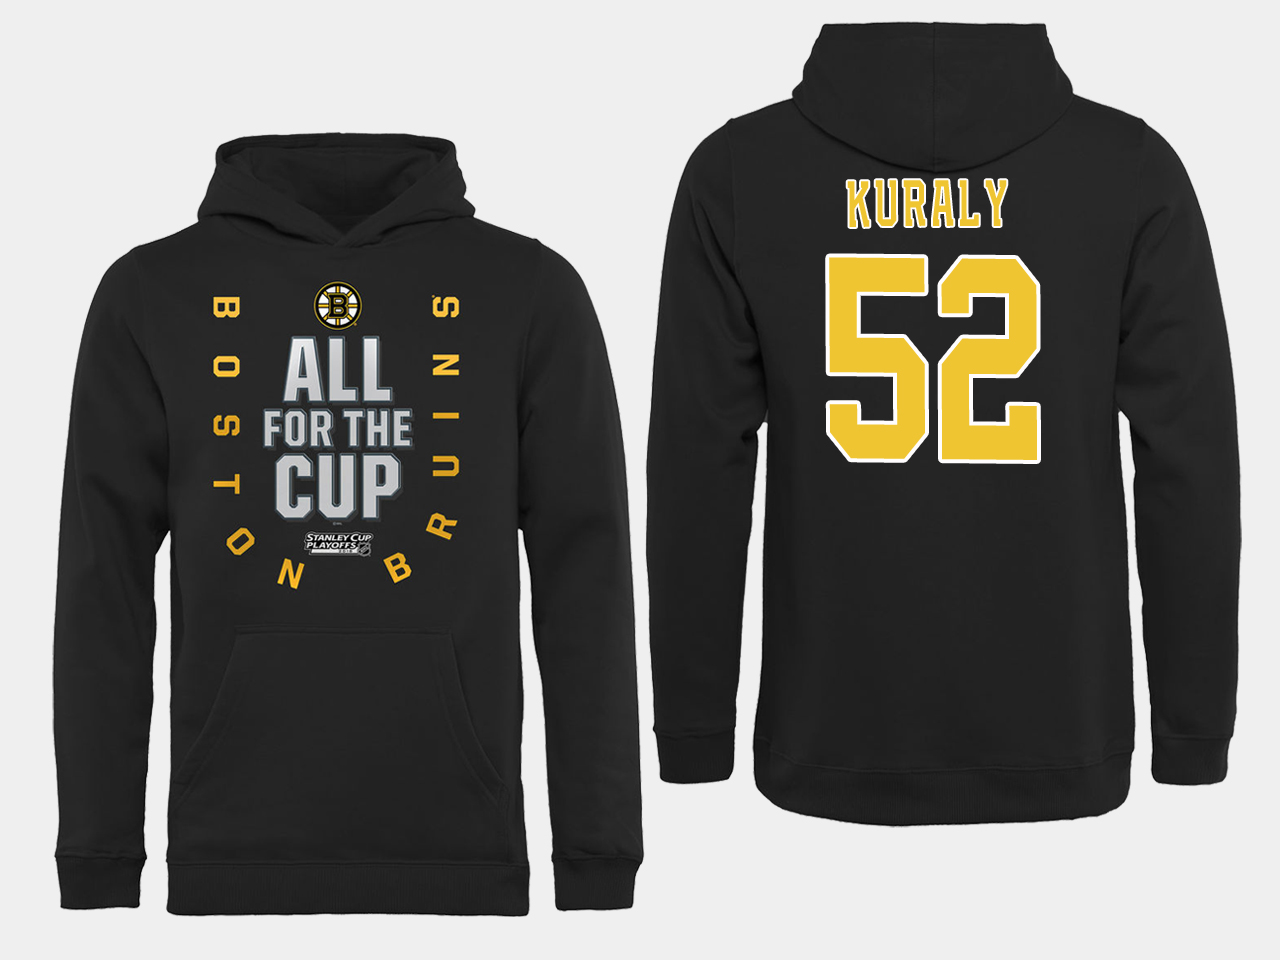 NHL Men Boston Bruins 52 Kuraly Black All for the Cup Hoodie